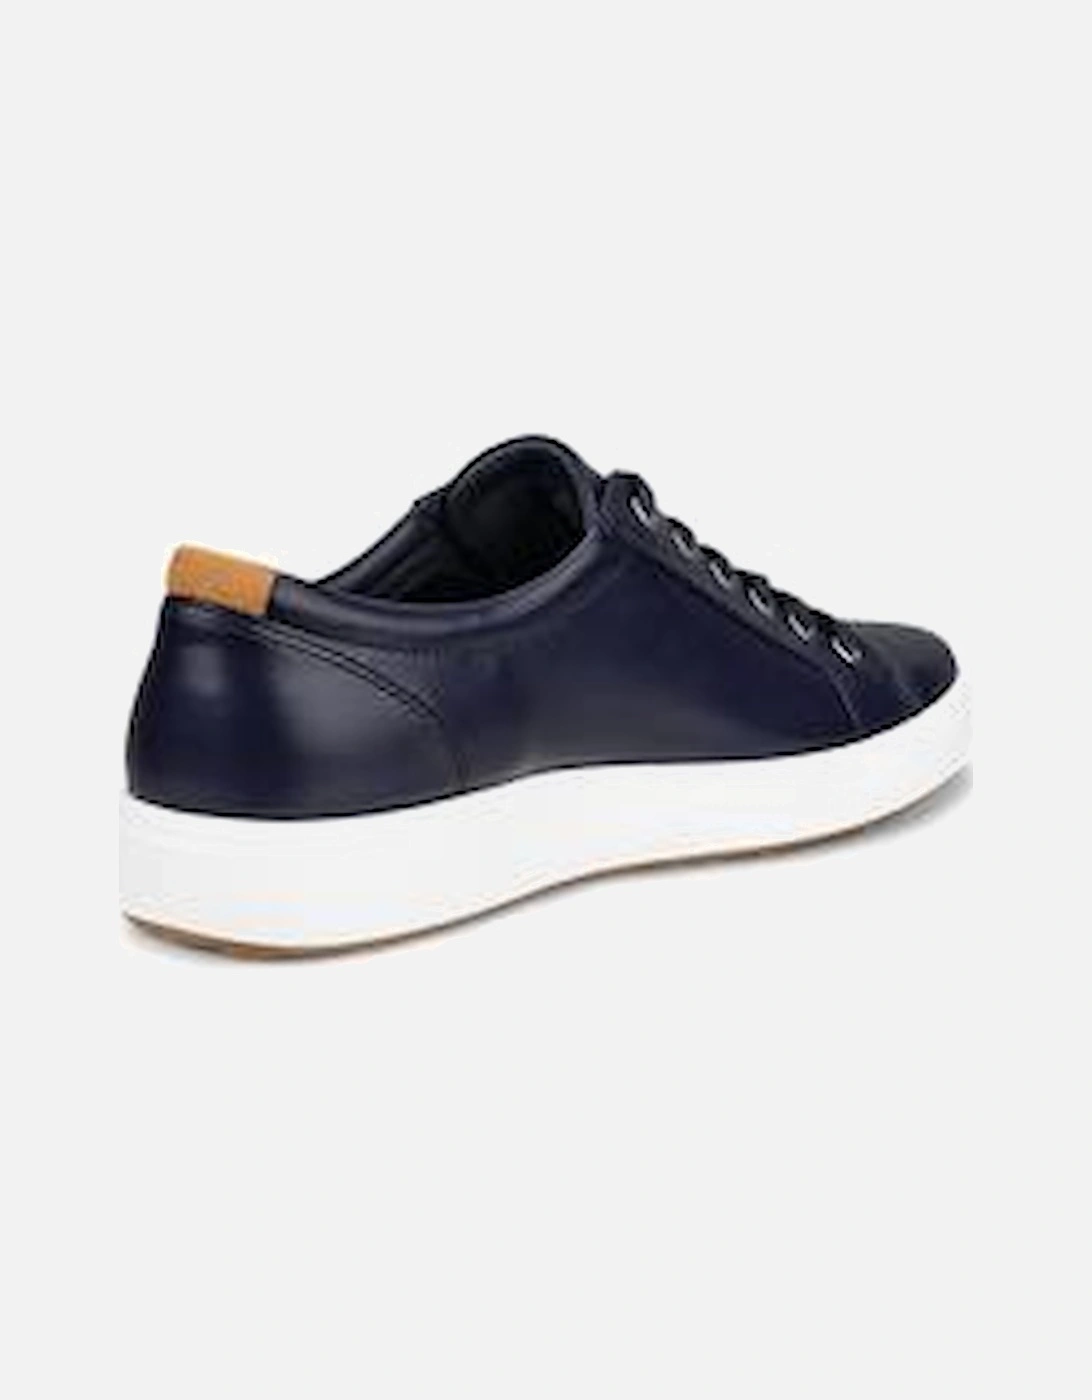 mens sneakers 430004-11303 in navy leather